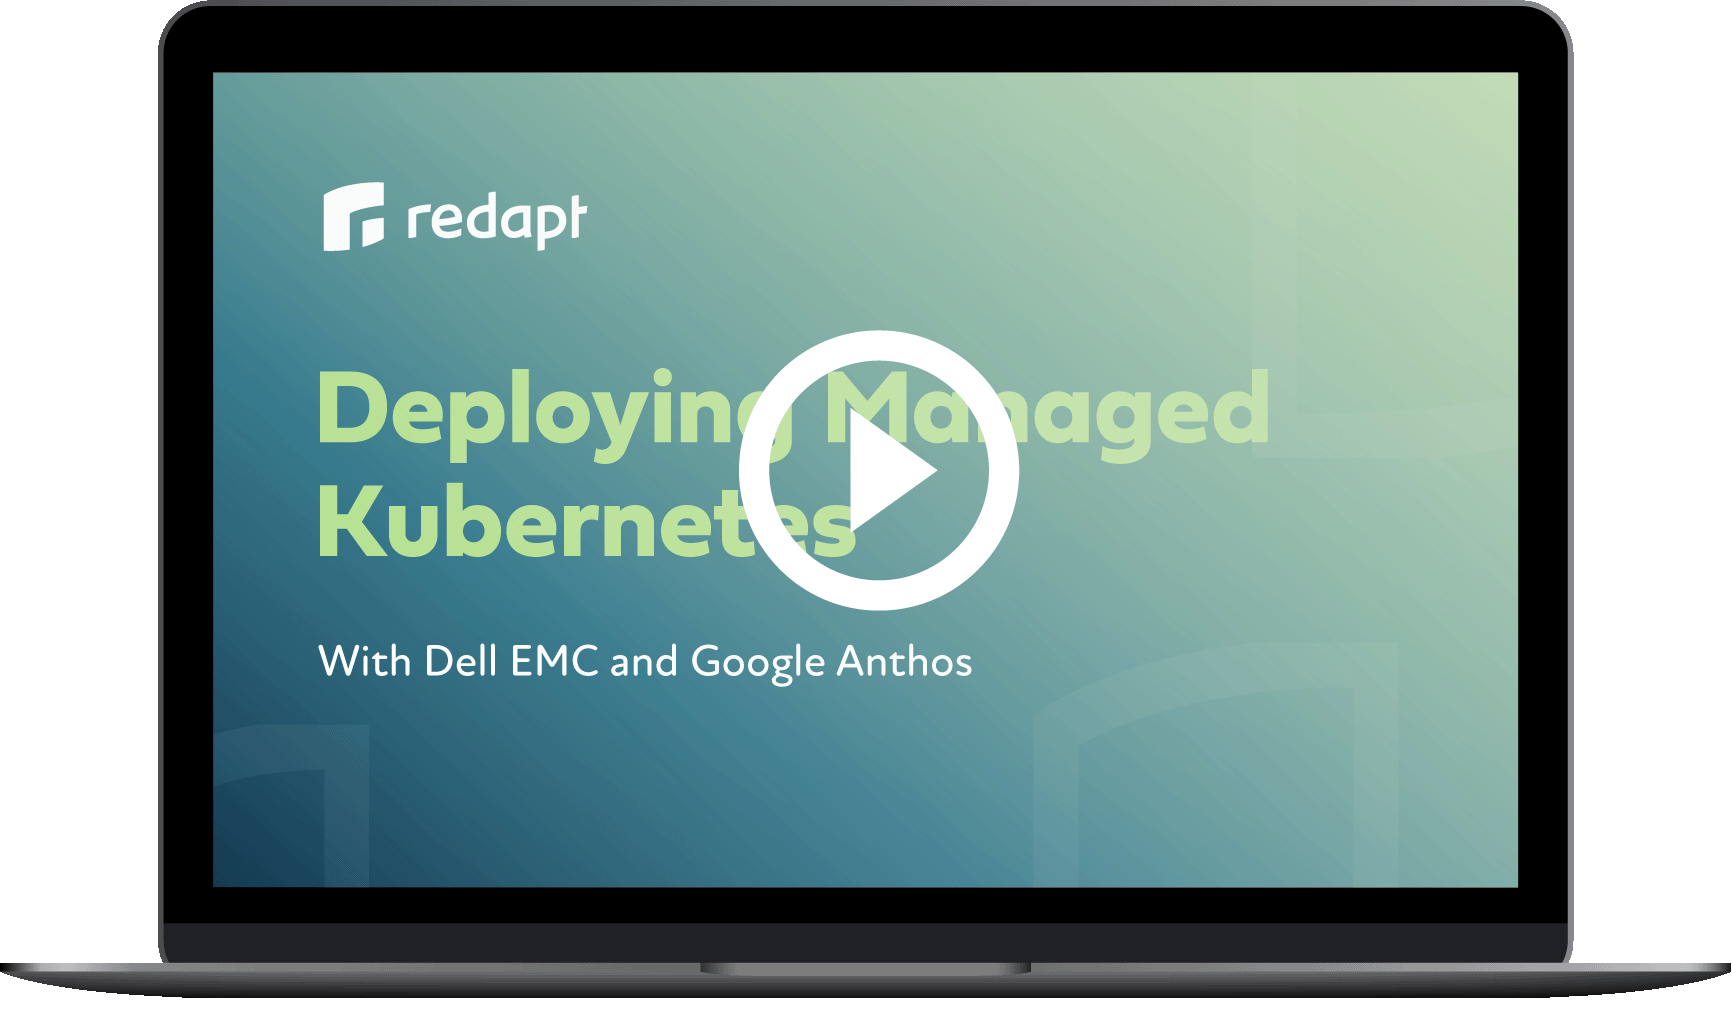 Watch the Webinar: Deploying Managed Kubernetes with Dell EMC and Google Anthos